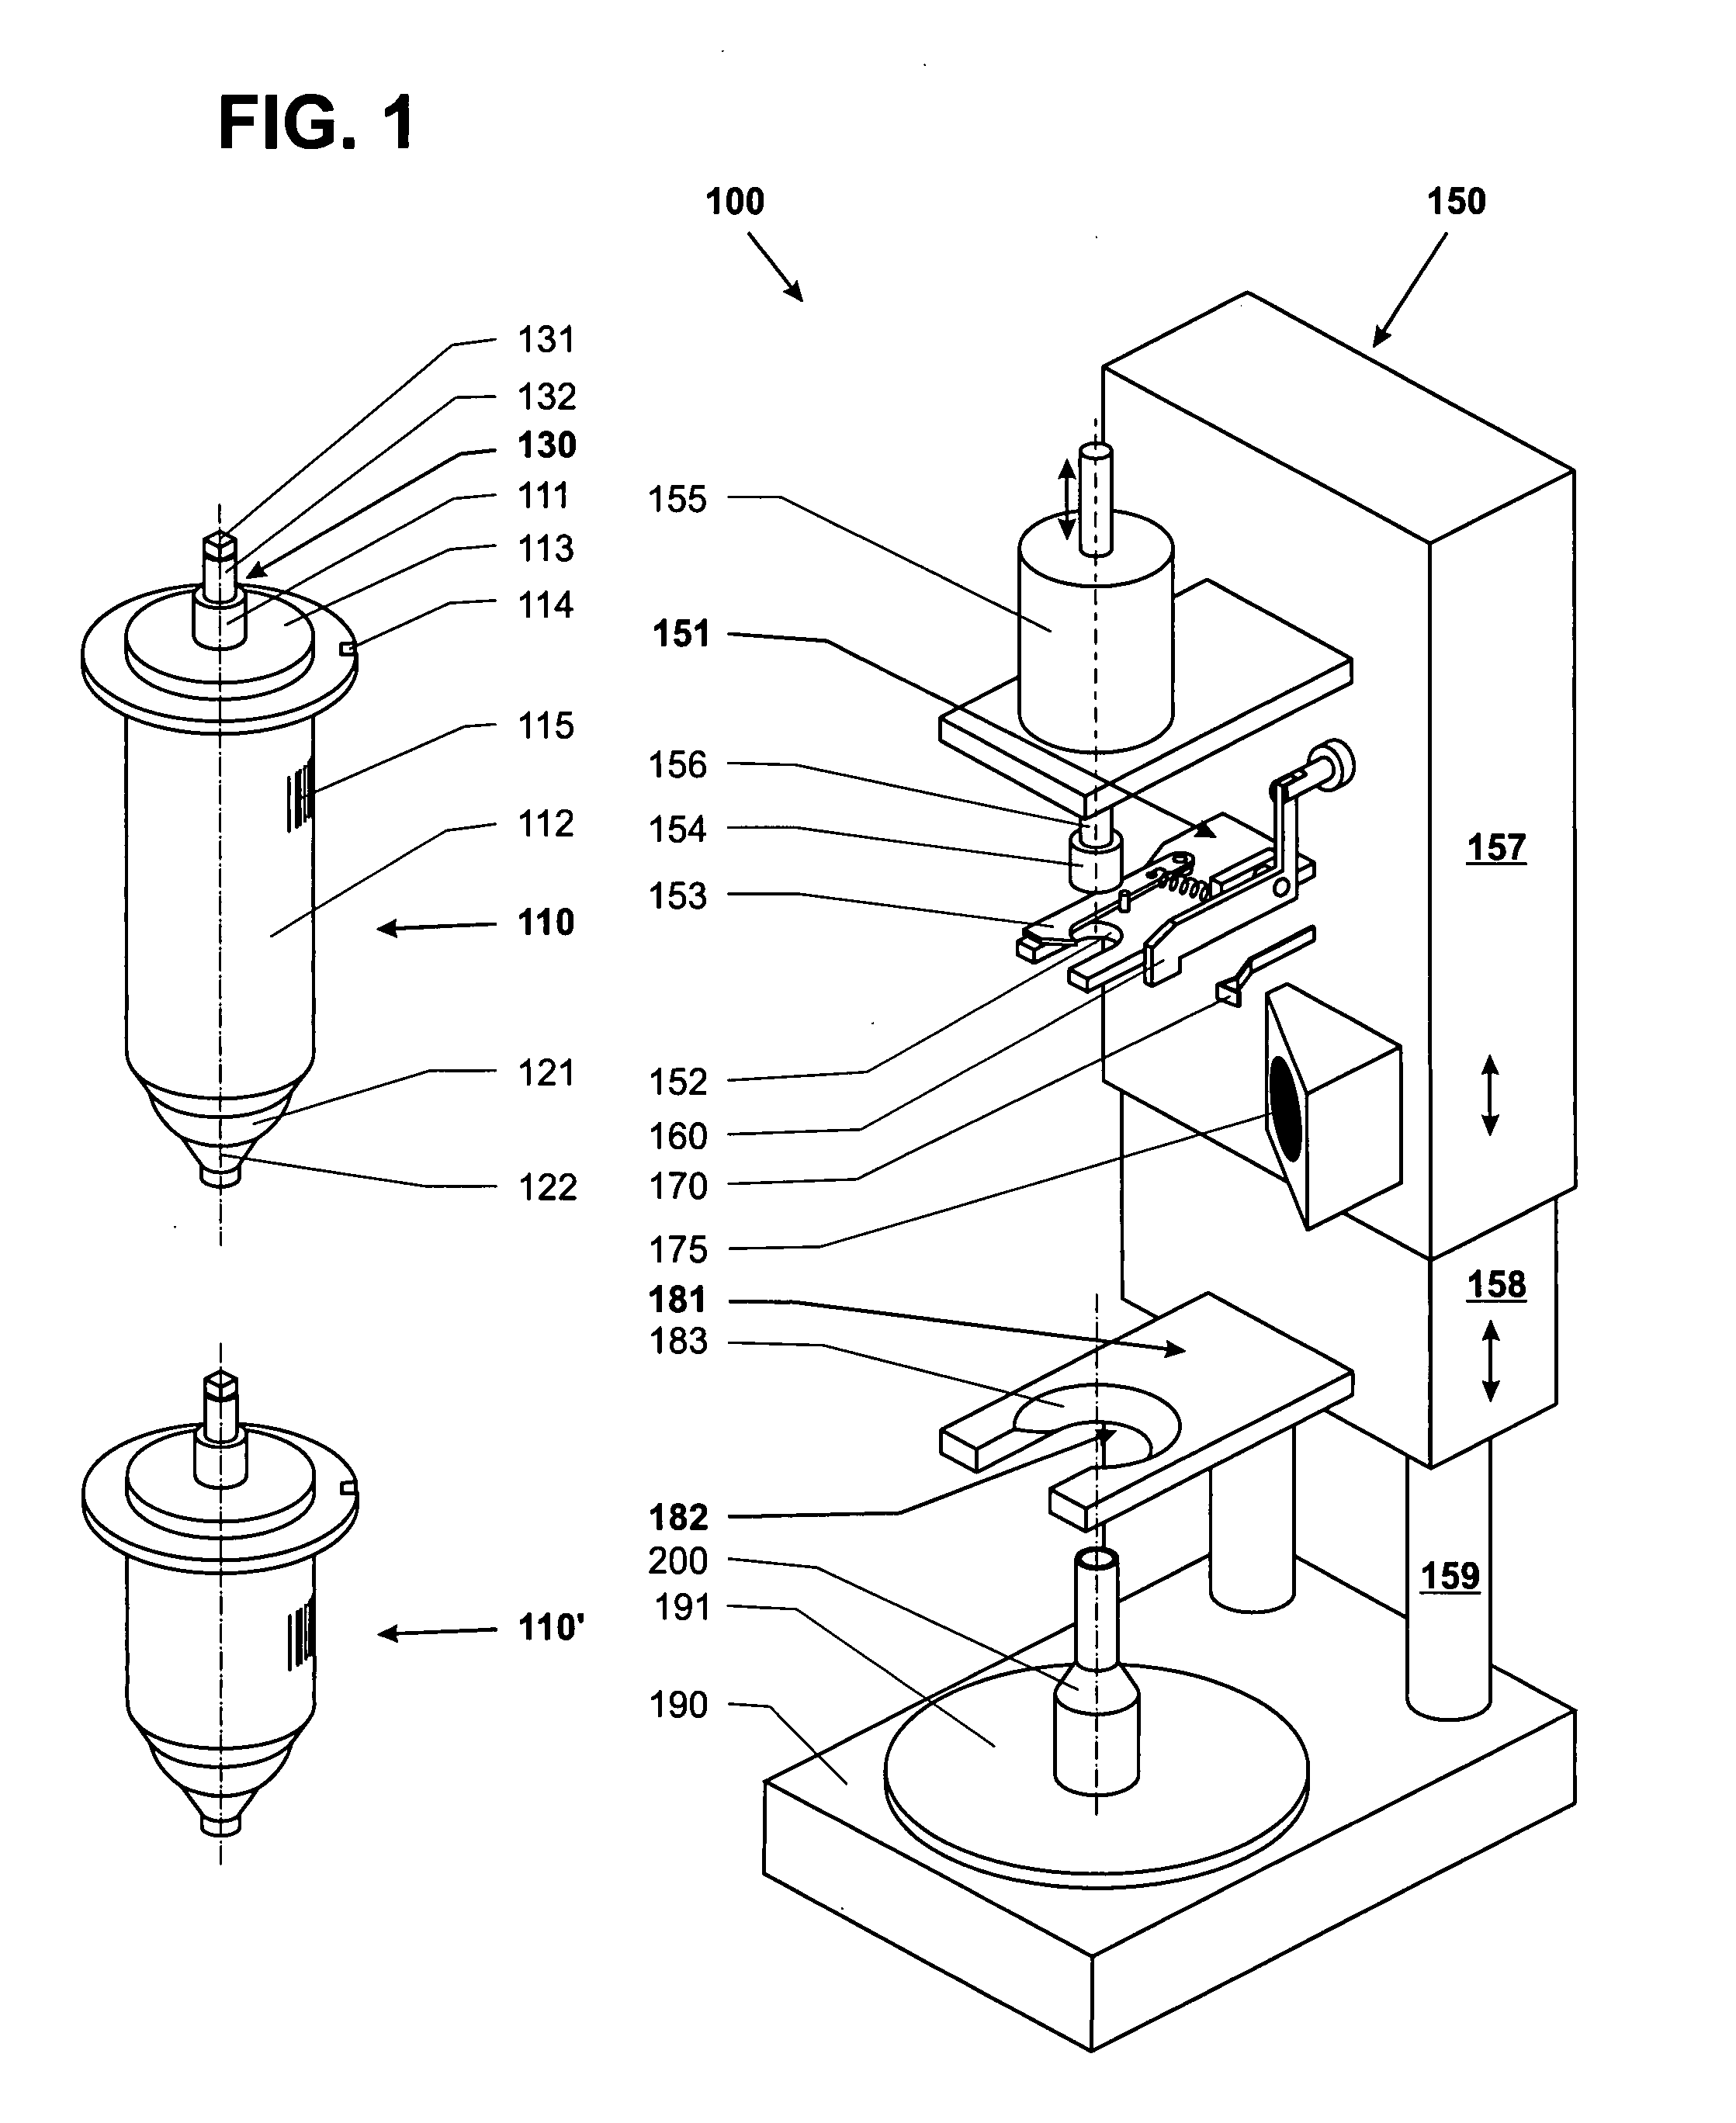 Dosage-dispensing device for powders or pastes